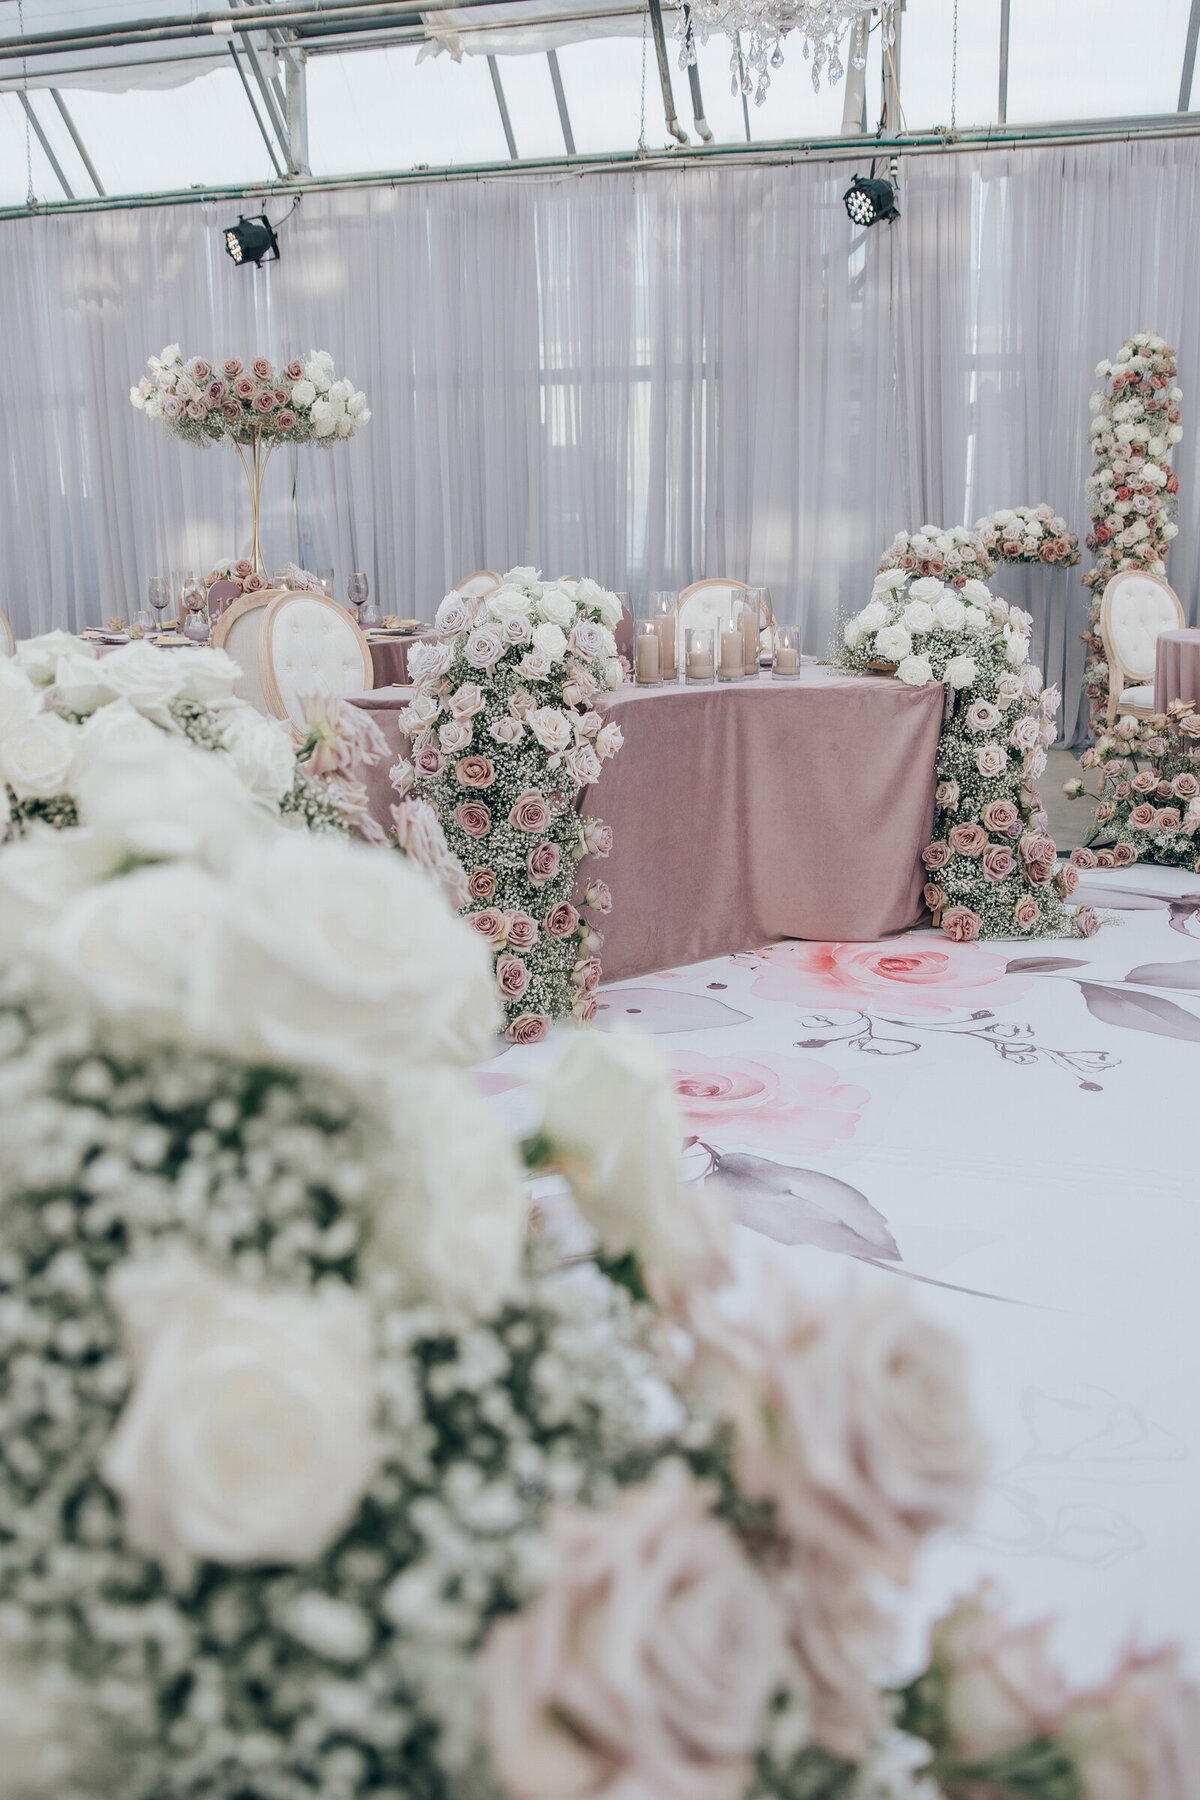 Luxurious roses spilling over head table at luxurious wedding